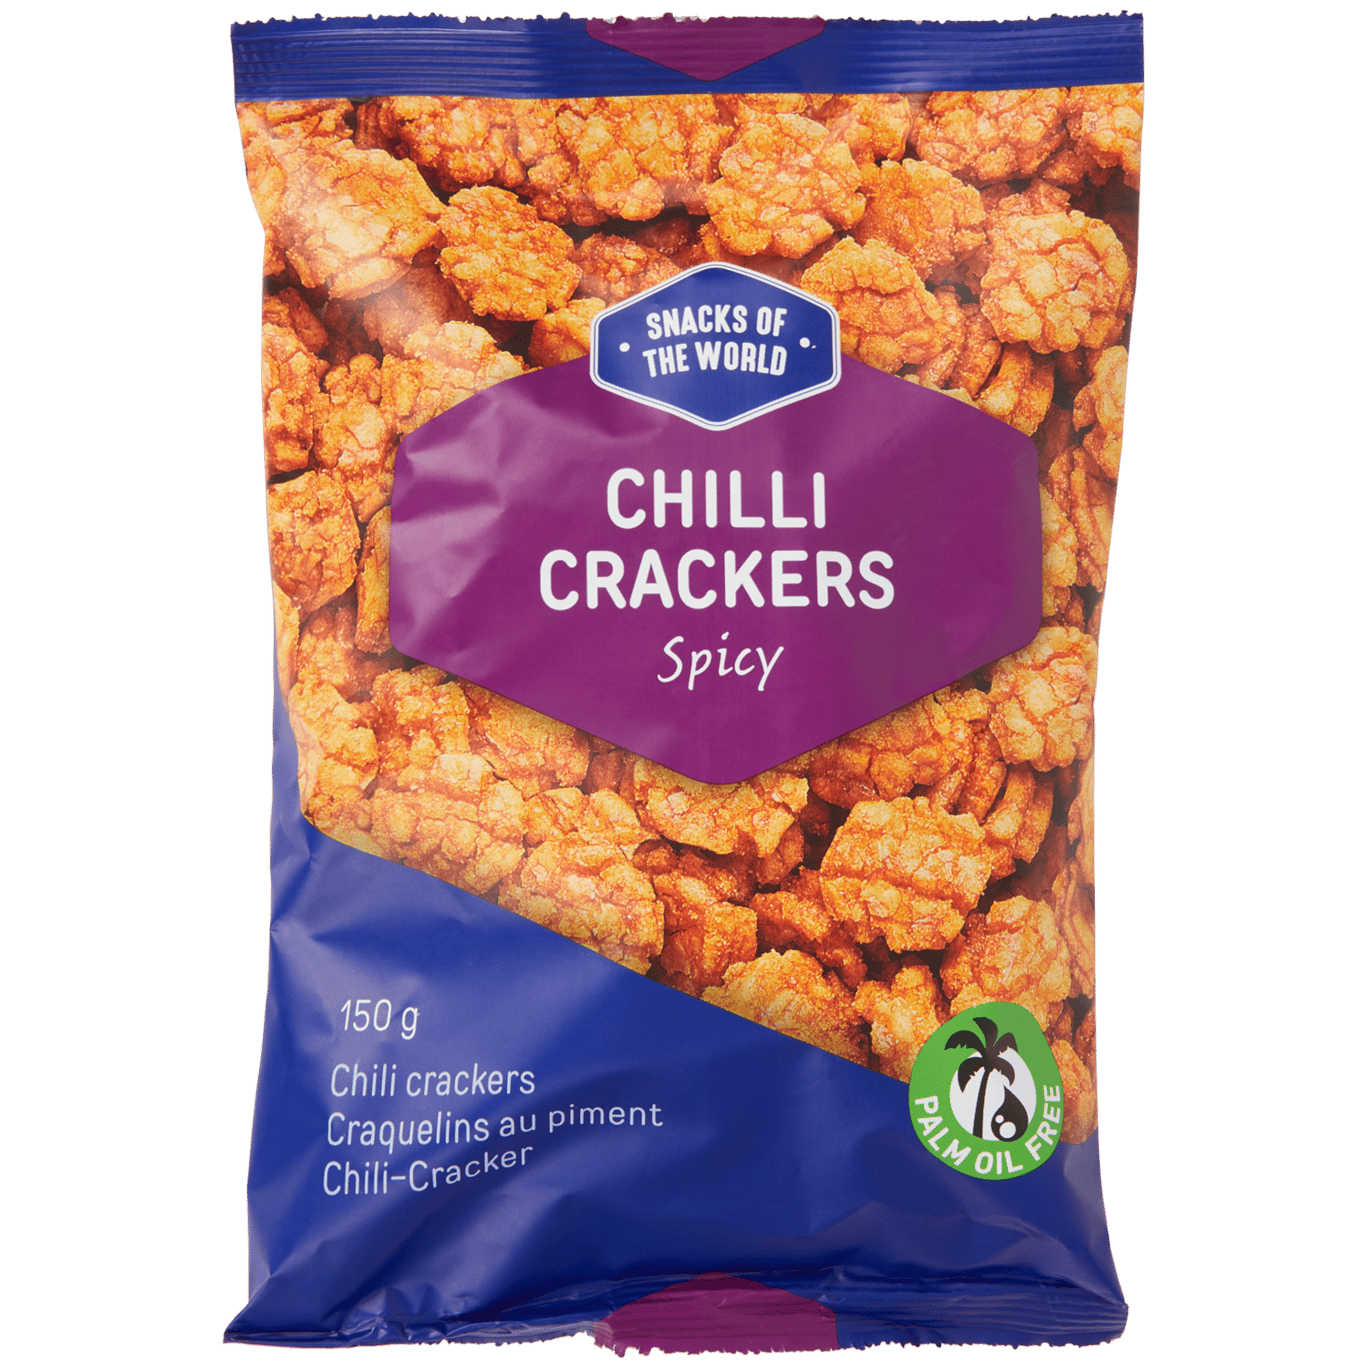 Snacks of the World Chilli Crackers Spicy